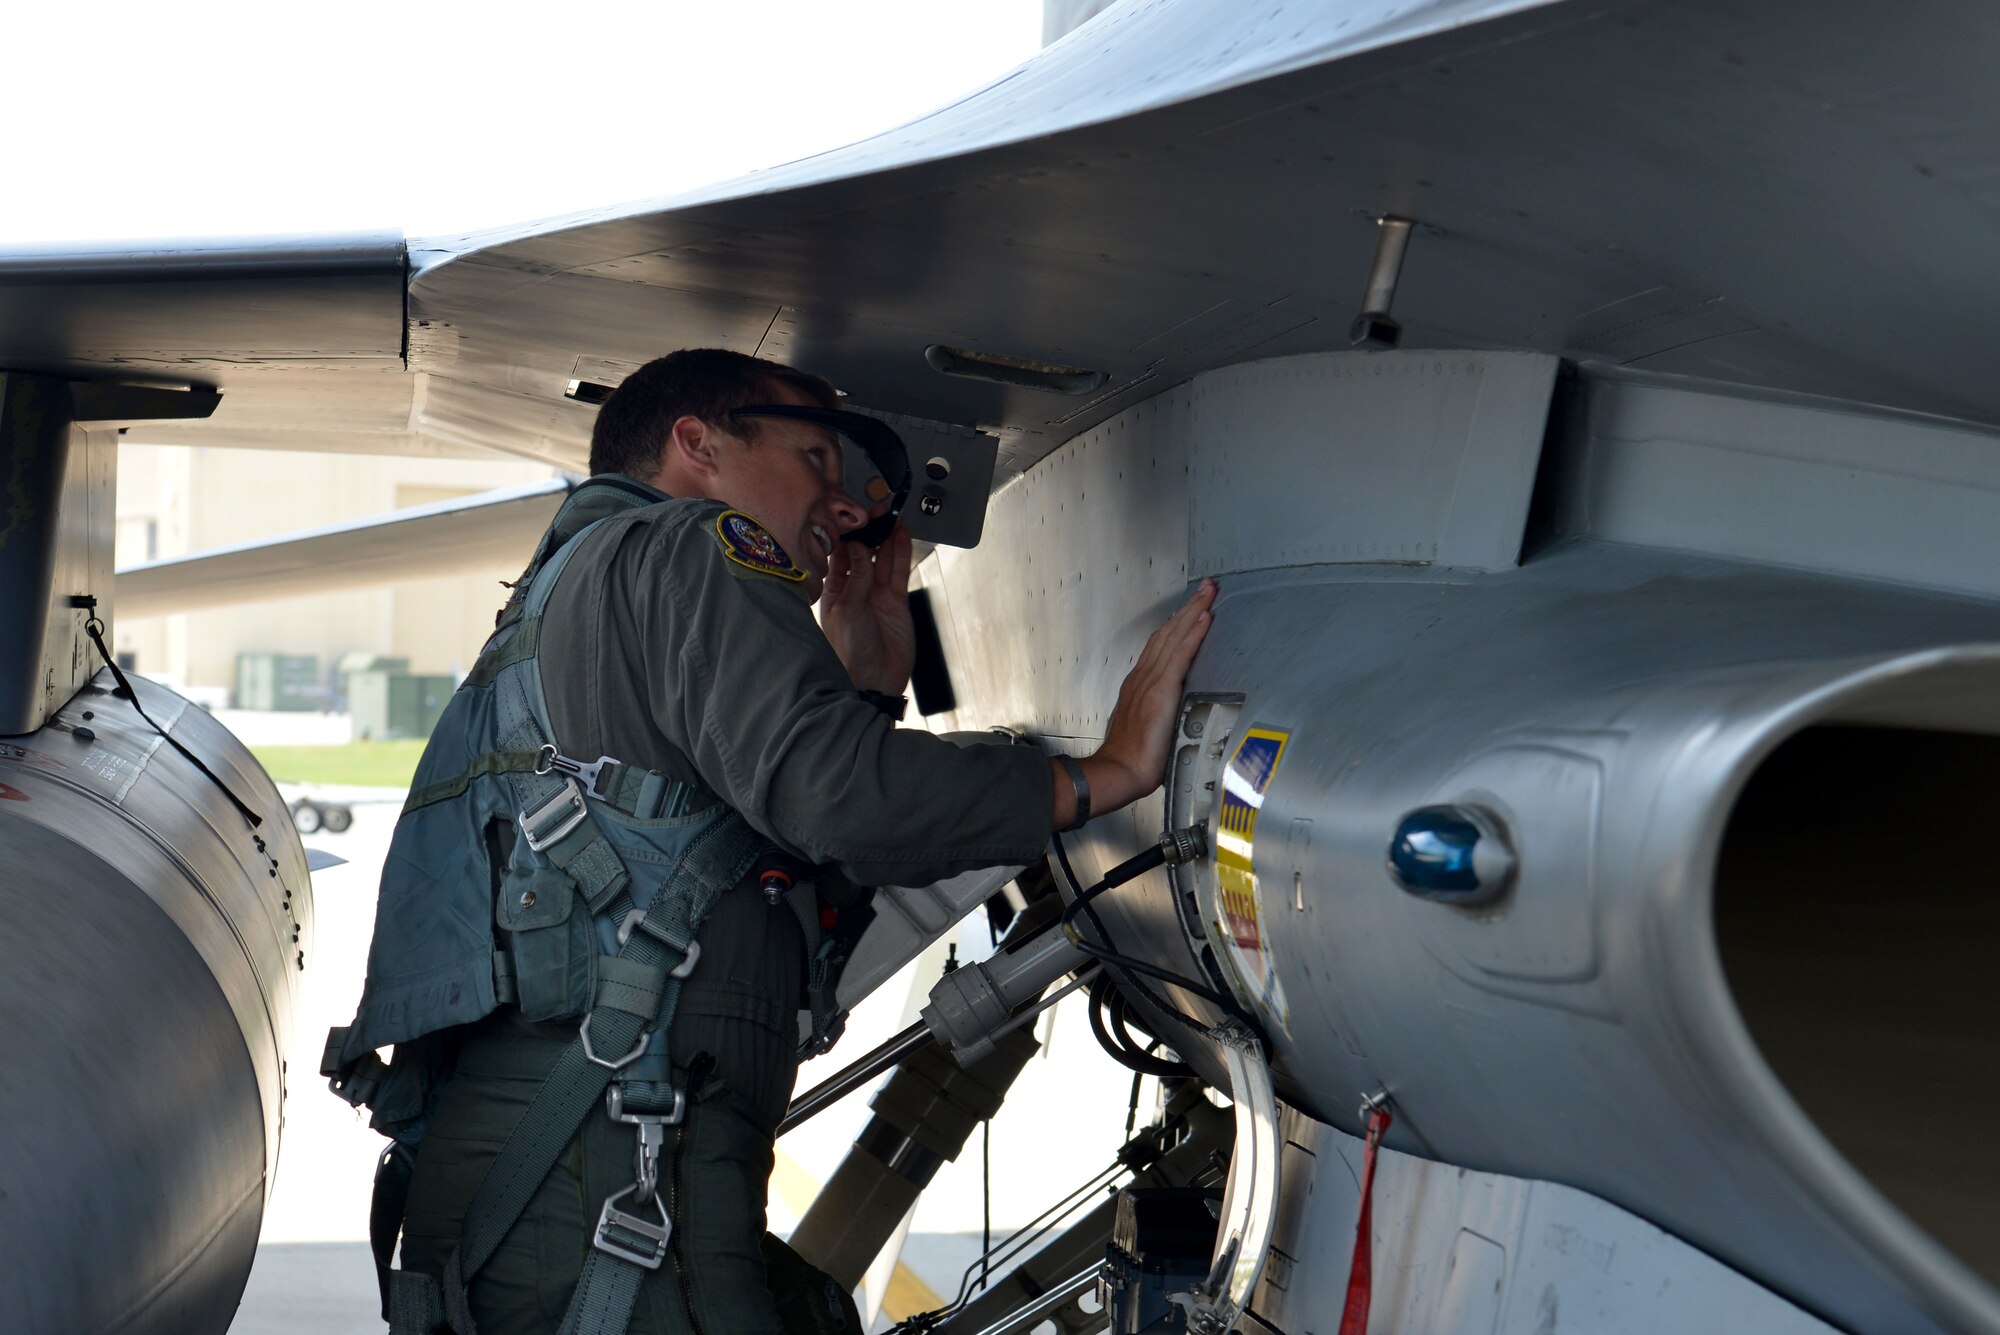 U.S. Air Force Capt. Matthew Kimmel, 79th Fighter Squadron (FS) pilot and U.S. Thunderbirds pilot-select, inspects an F-16CM Fighting Falcon prior to flying at Shaw Air Force Base, S.C., July 19, 2016. Kimmel was inspired by the Thunderbirds when he watched them perform at a Travis Air Force Base Air Show in California. (U.S. Air Force photo by Airman 1st Class Destinee Sweeney)